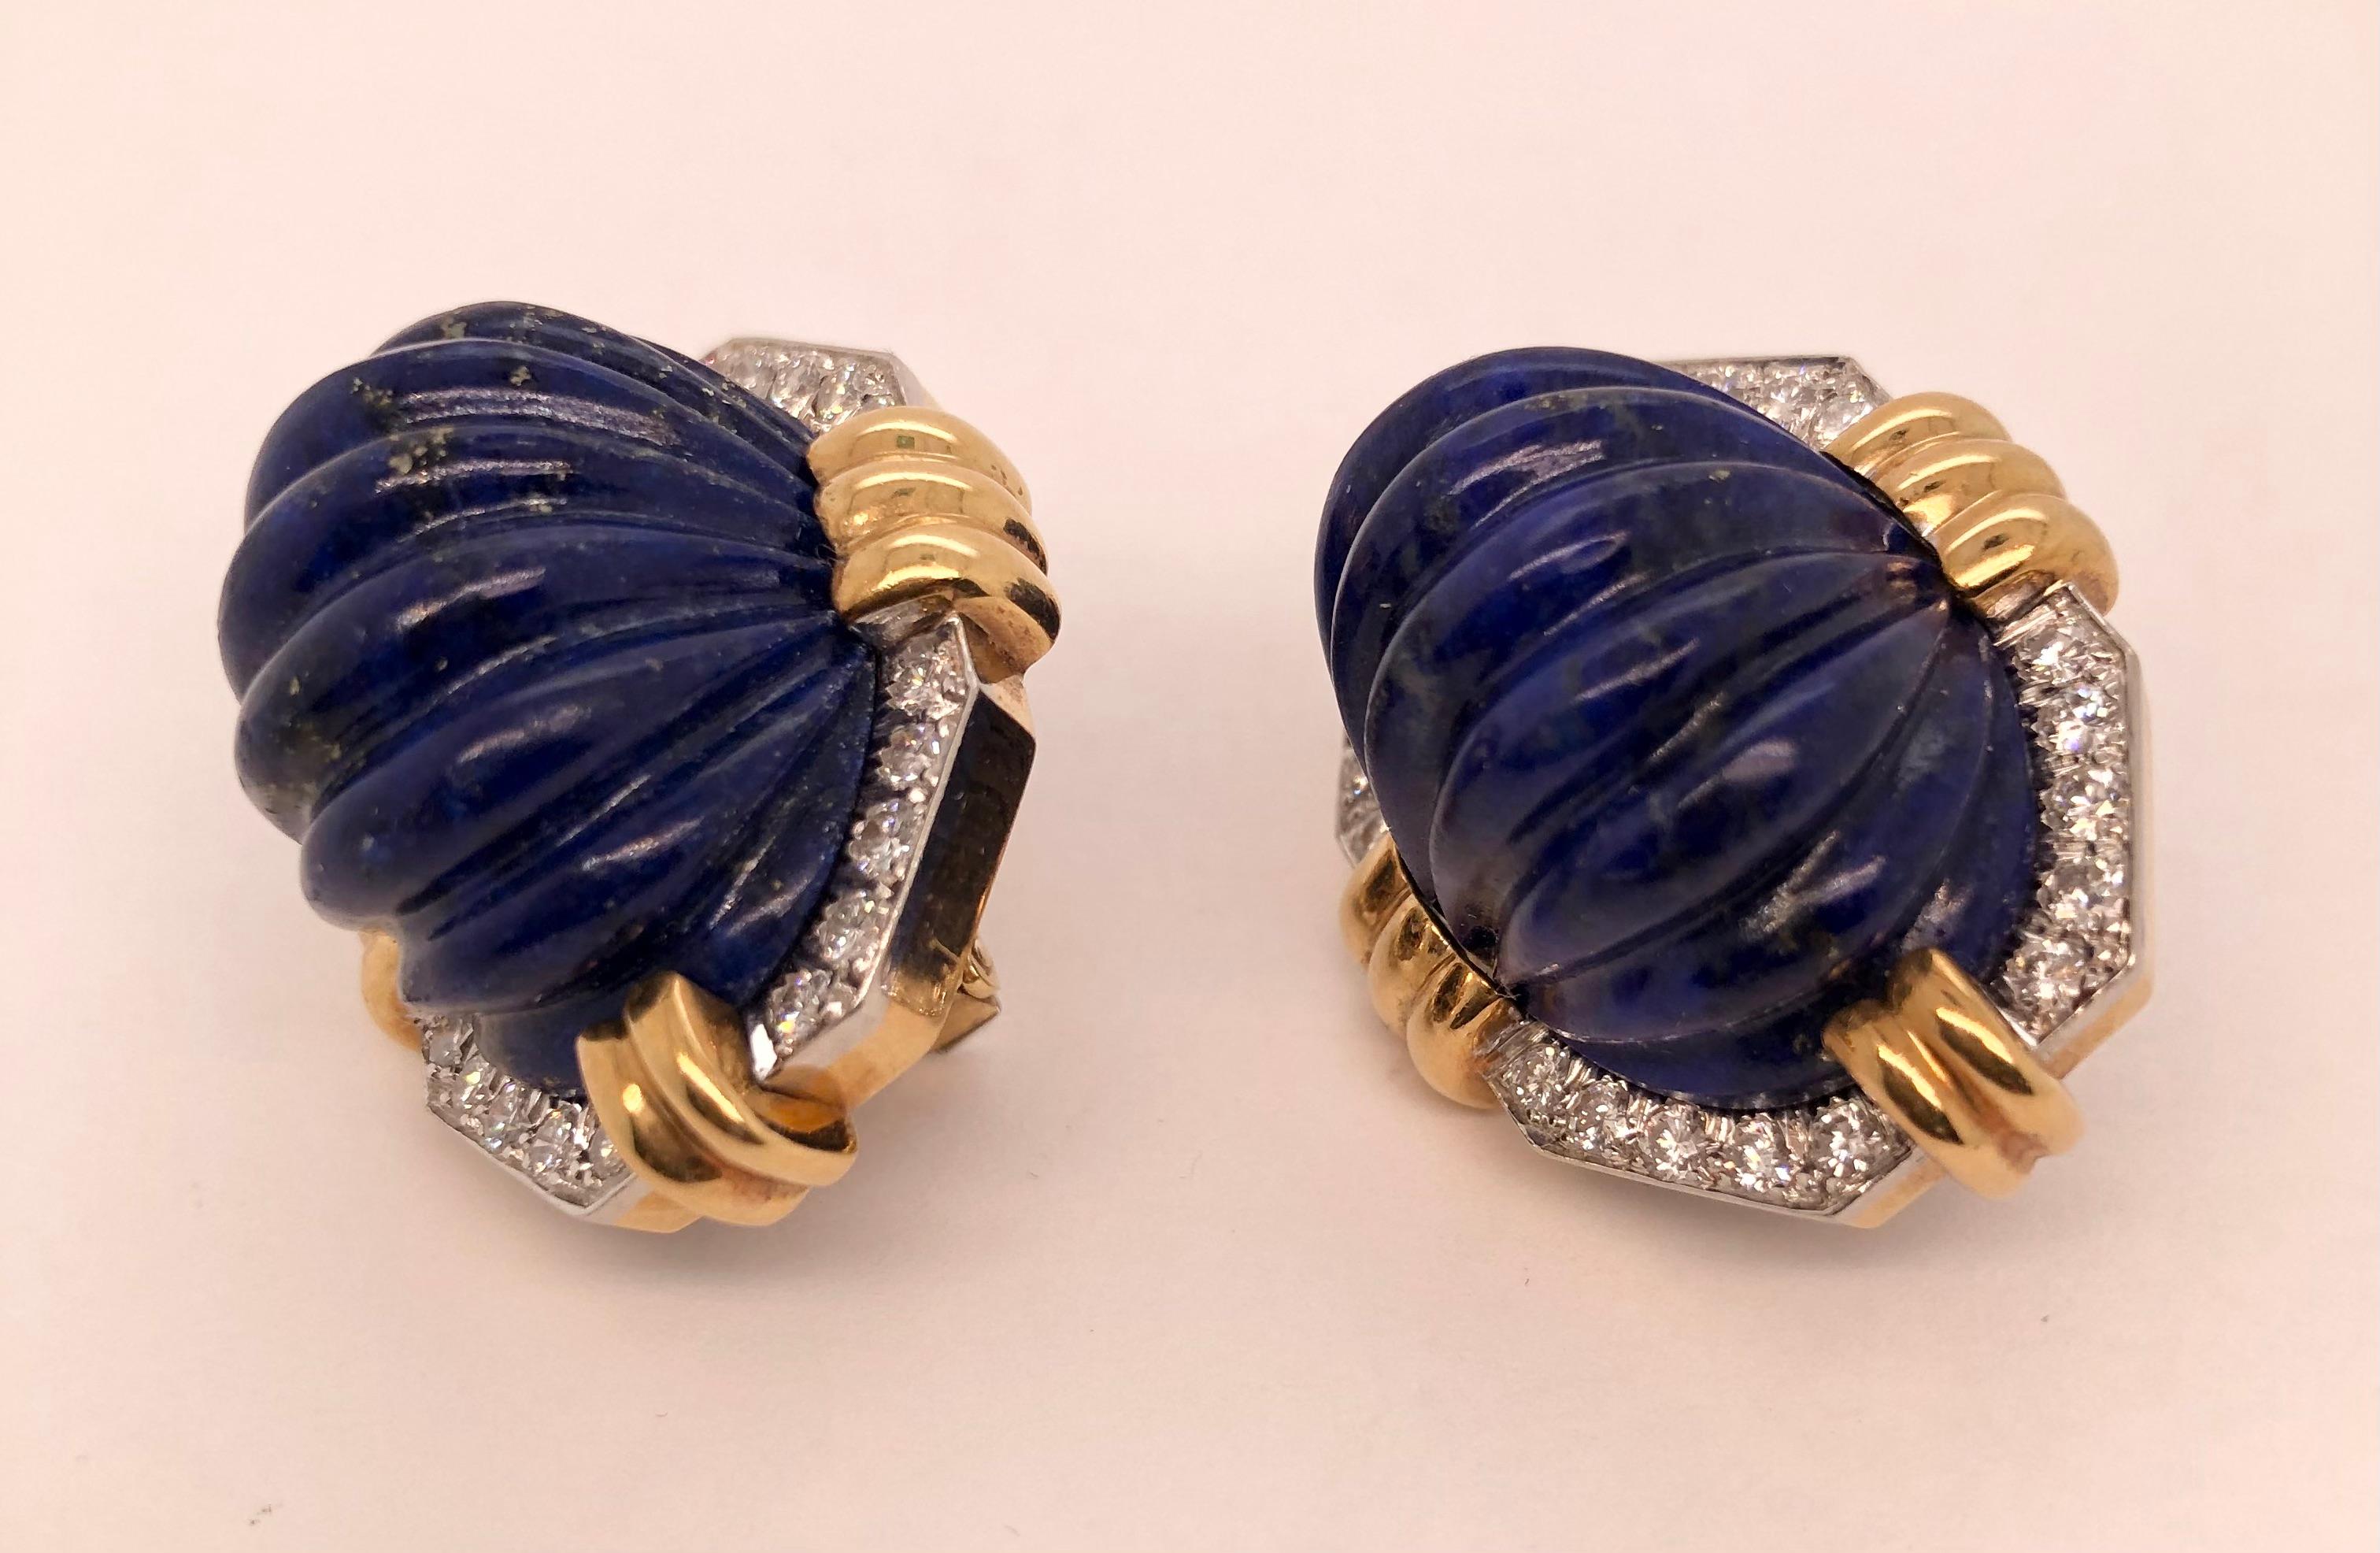 Beautiful 1980' David Webb 18K gold and platinum diamond carved lapis earclips fitted with posts. Set with 40 diamonds approx 2.40cts. approx E - F color VS clarity. 
Measurment: 32.7mm x 26.2mm x 26.8mm
Weight: 43.0g
Marked: WEBB, 18K, PLAT